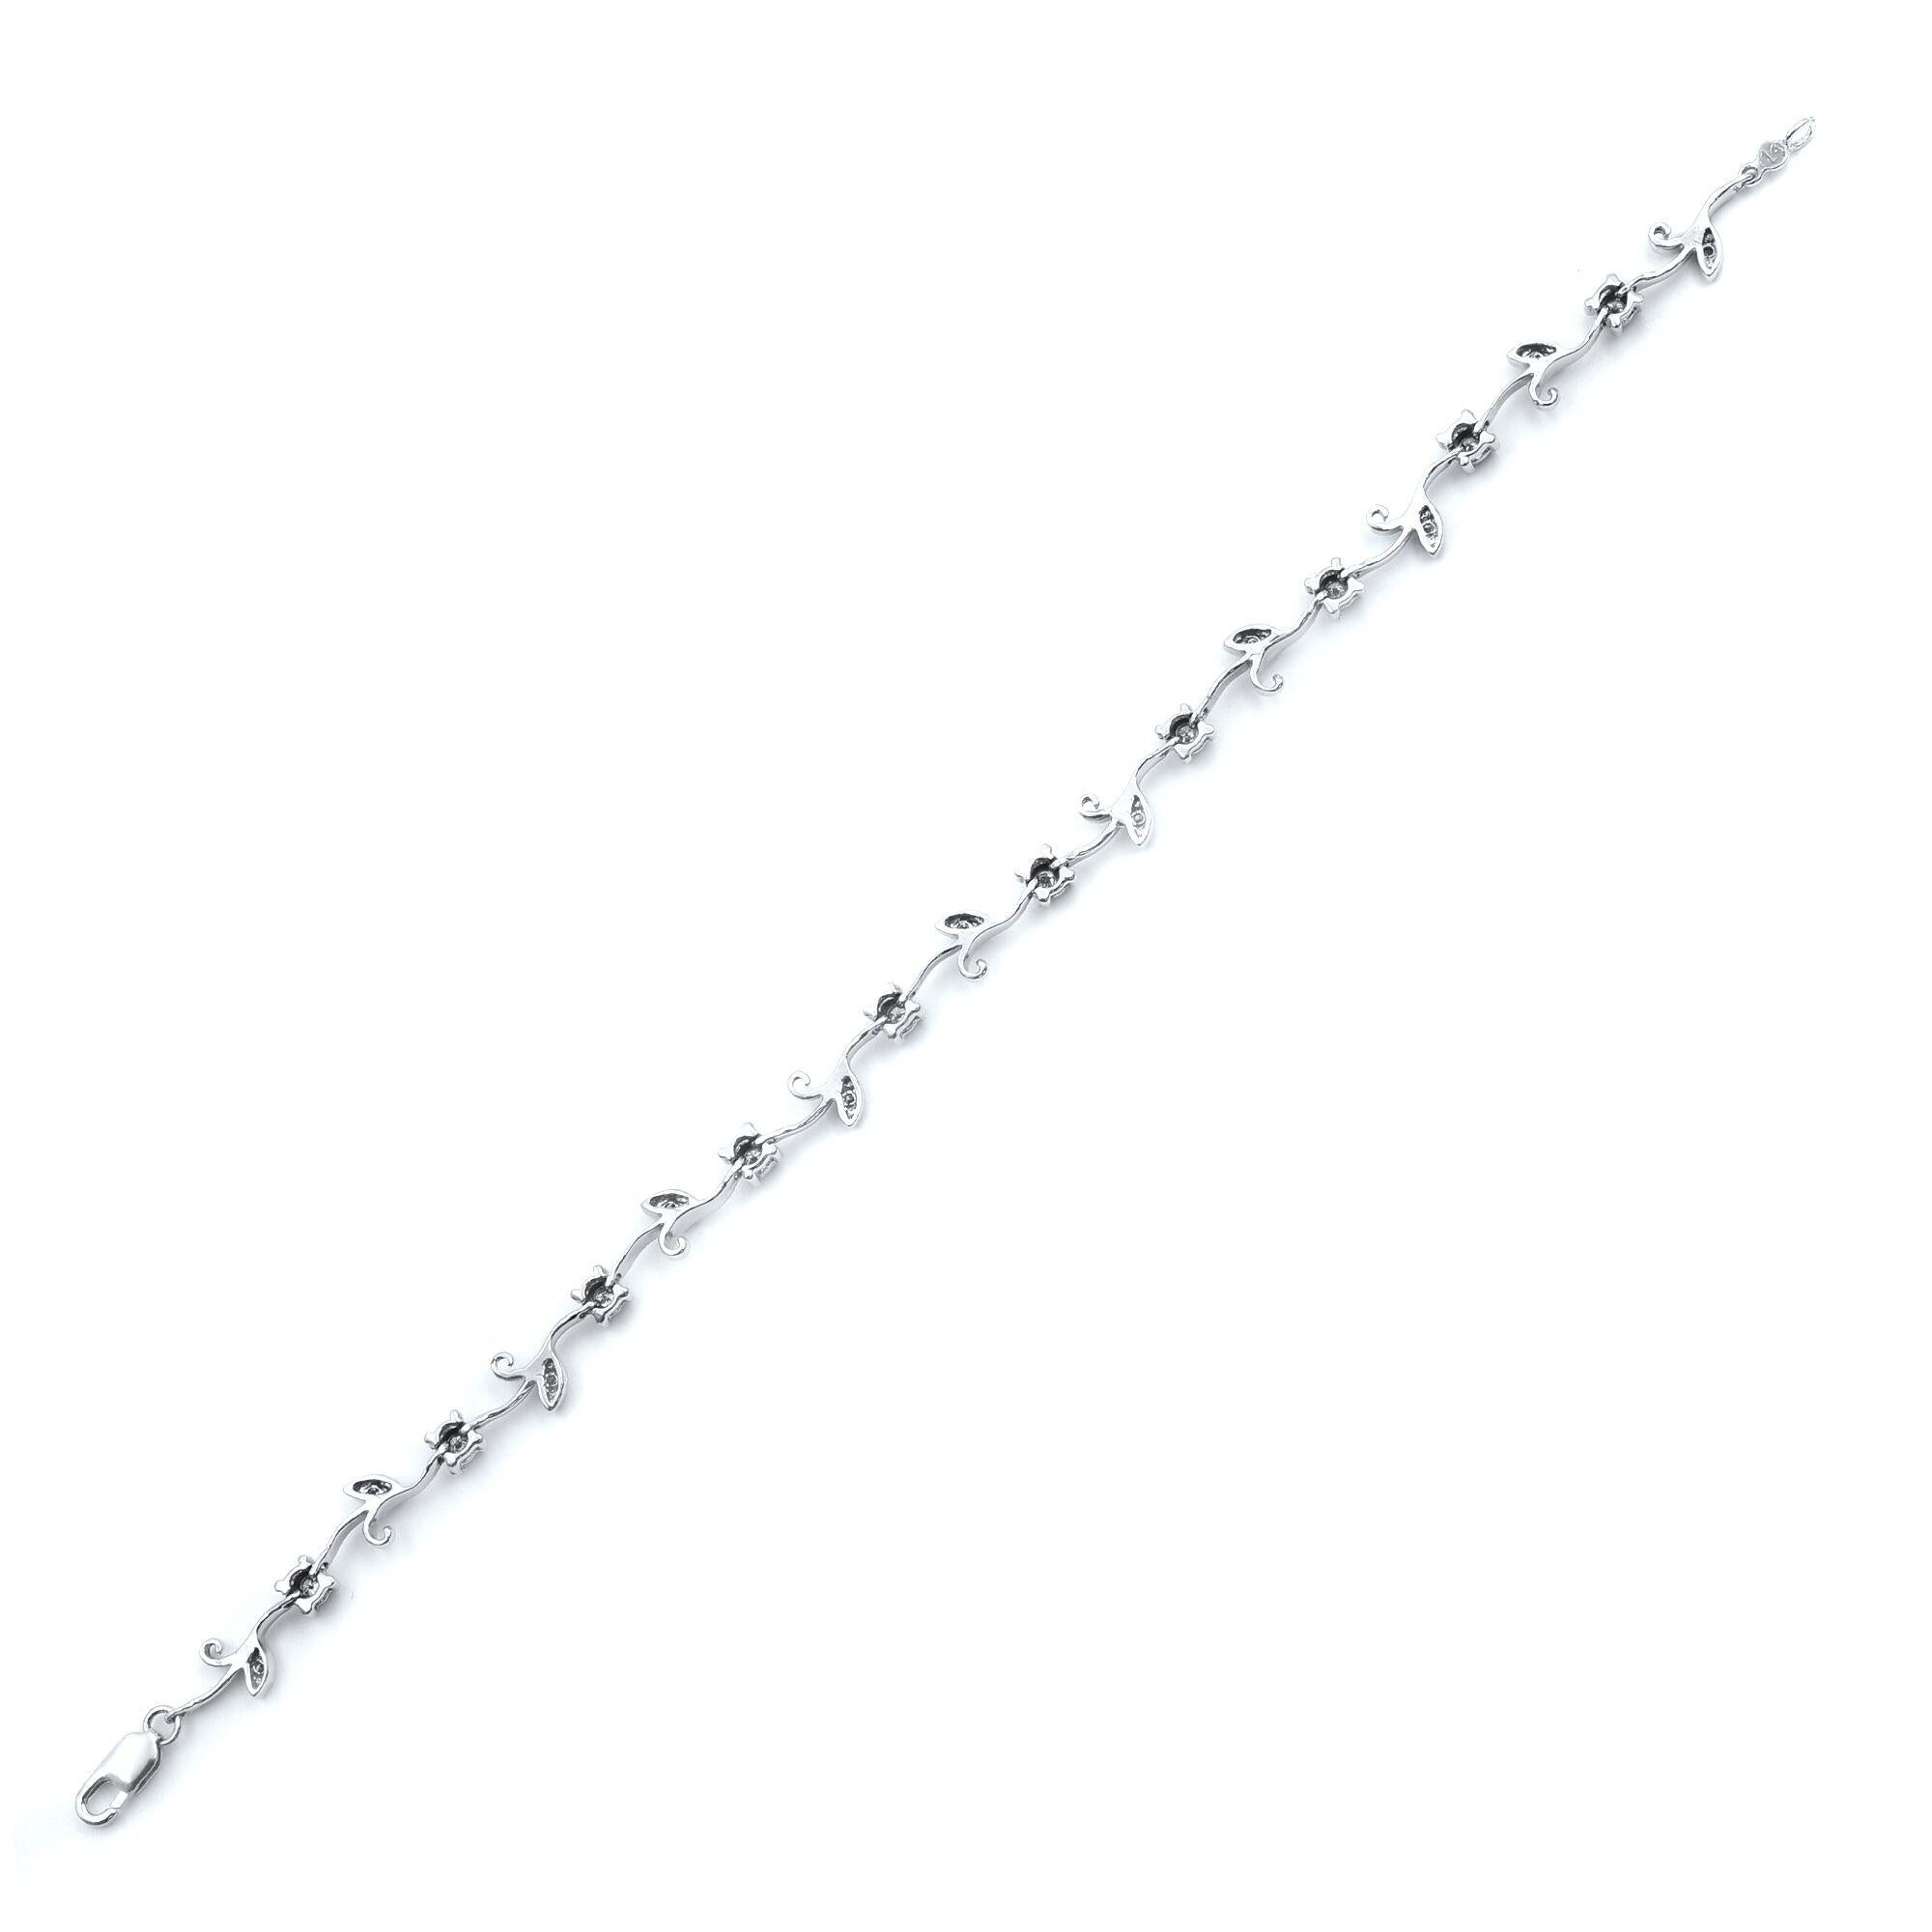 Sparkling diamond floral bracelet crafted in 14k white gold, featuring round brilliant cut diamonds. Total diamond weight is approximately 0.25cts. Closure: lobster lock. Bracelet length: 7 inches. Comes in a presentable gift box. 